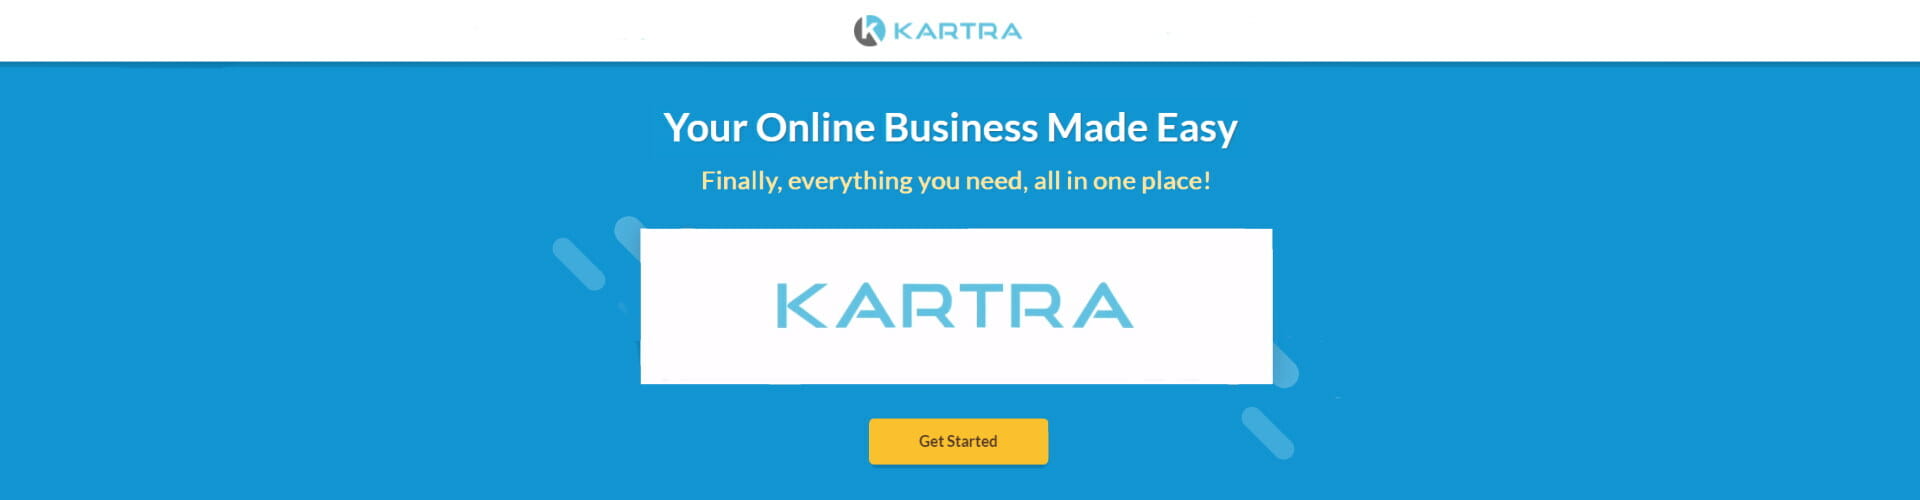 Image of the Karta home page